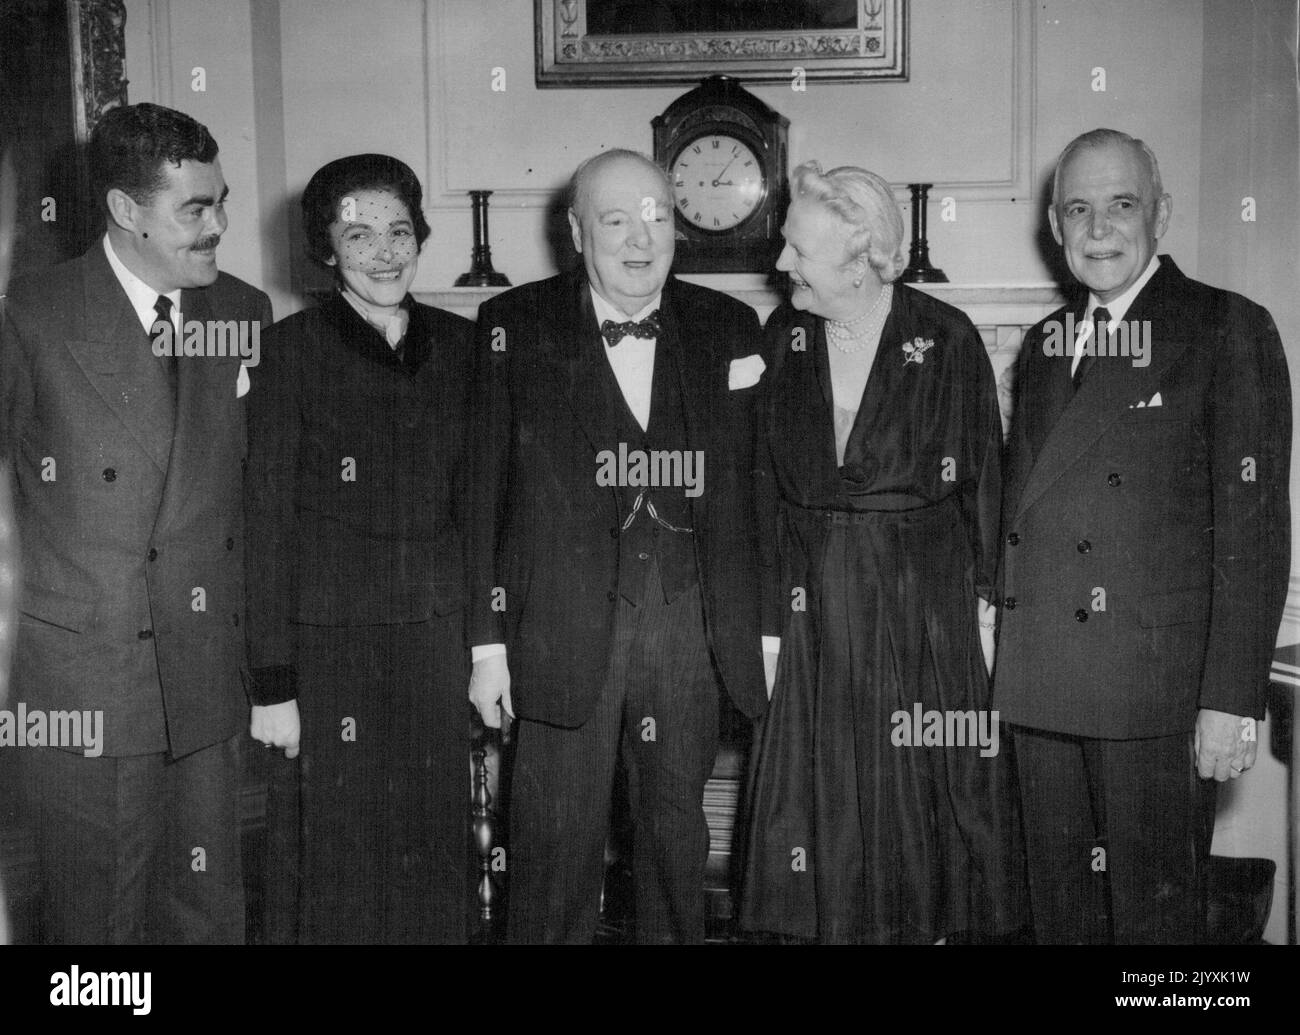 Canadian Premier Lunches With Churchill - Left to Right-Mr. Jean Paul St. Laurent: Mrs. Hugh O'Donnell (son and daughter of the Canadian Premier); Sir Winston Churchill; Lady Churchill; and Mr. Louis St. Laurent. The Canadian Prime Minister is in London on a world tour to meet leaders in the search for an approach to peace. British Prime Minister Sir Winston Churchill with his guests, Canadian Prime Minister Mr. Louis St. Laurent and members of his family, at 10, Downing Street, London, to-day (Saturday). February 06, 1954. (Photo by Reuterphoto). Stock Photo